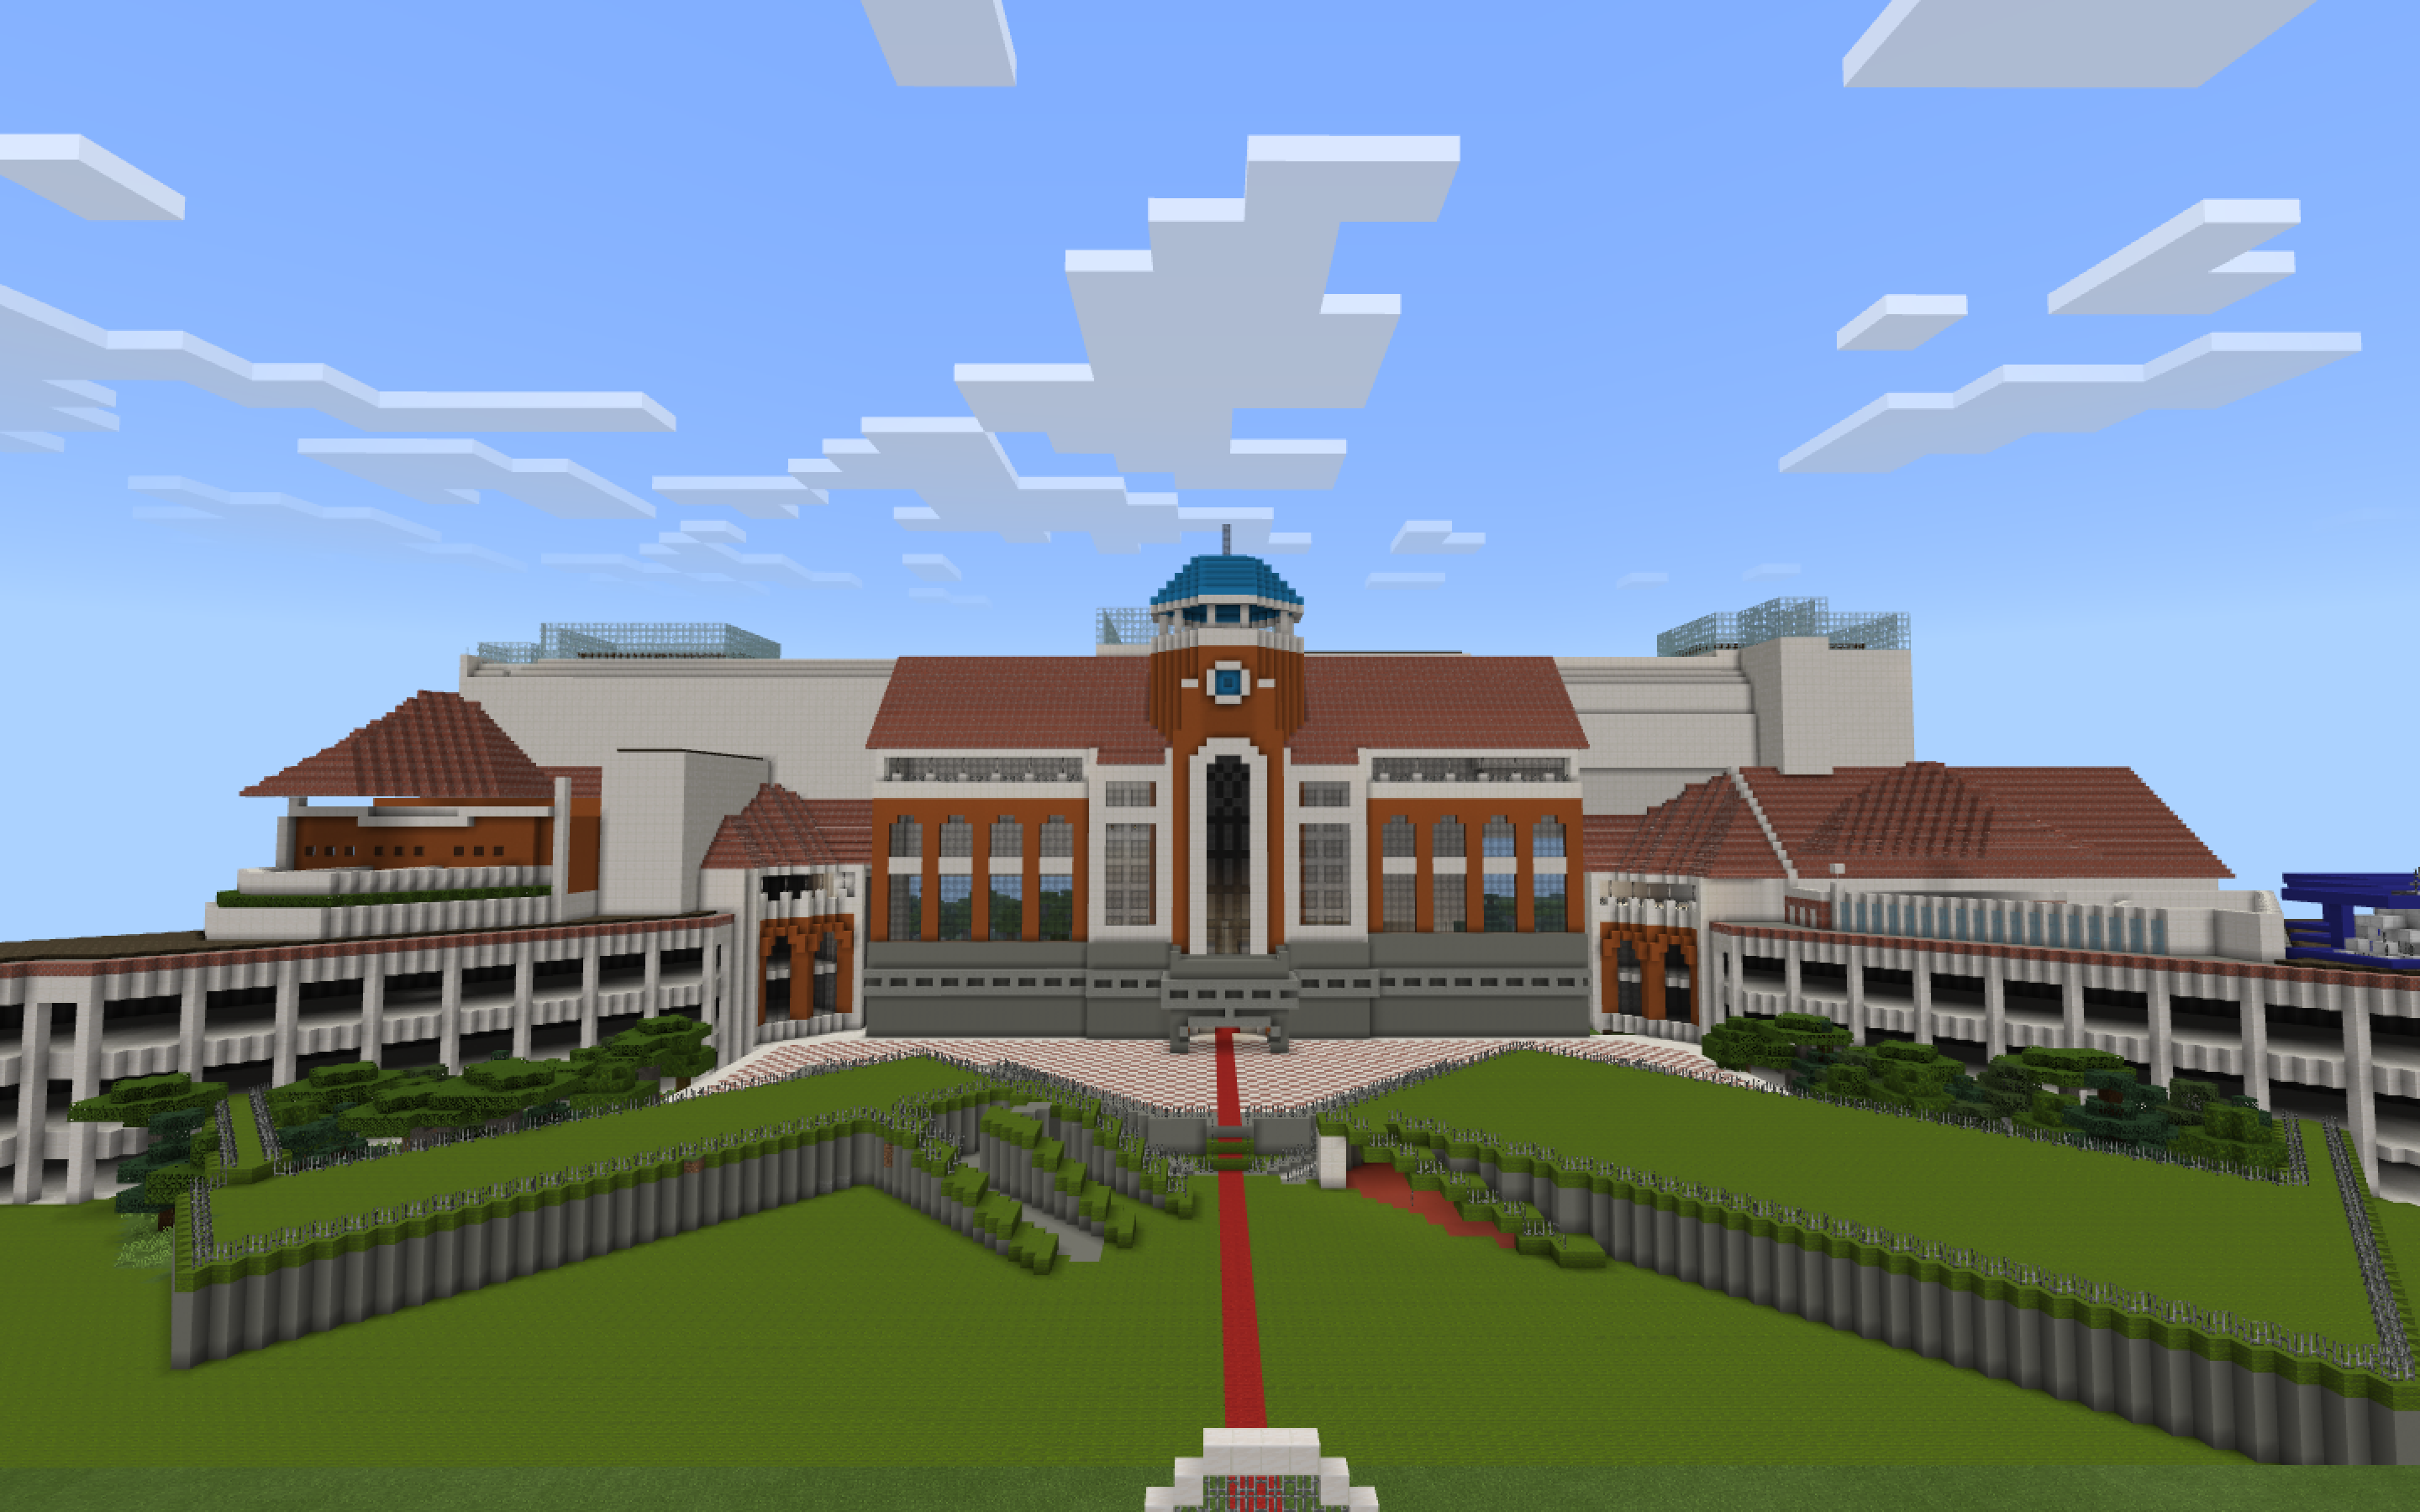 NGHS campus in Minecraft